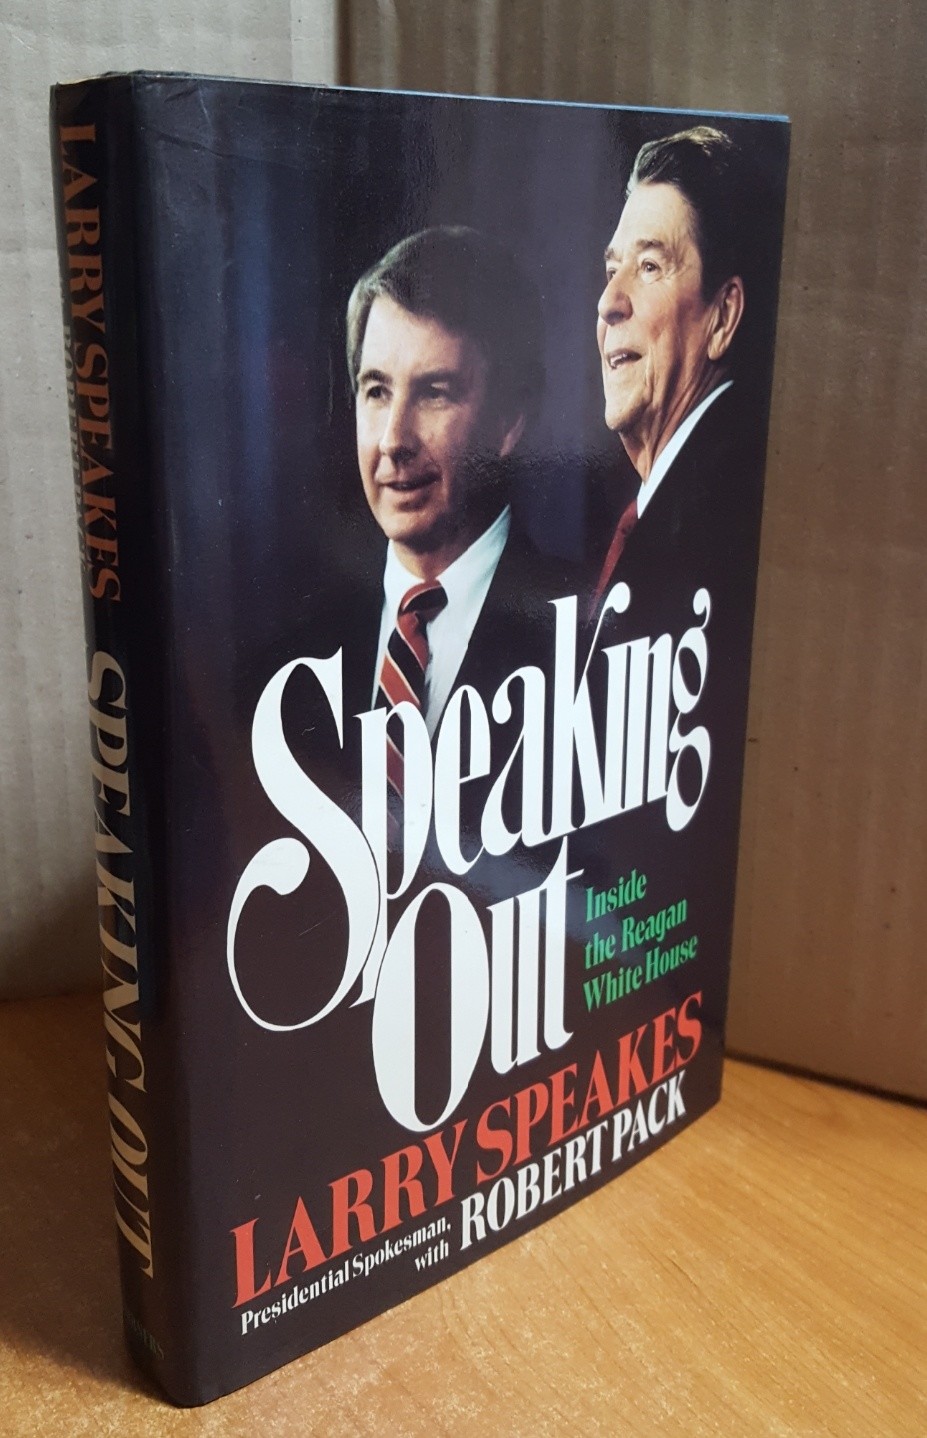 Speaking Out: The Reagan Presidency from Inside the White House